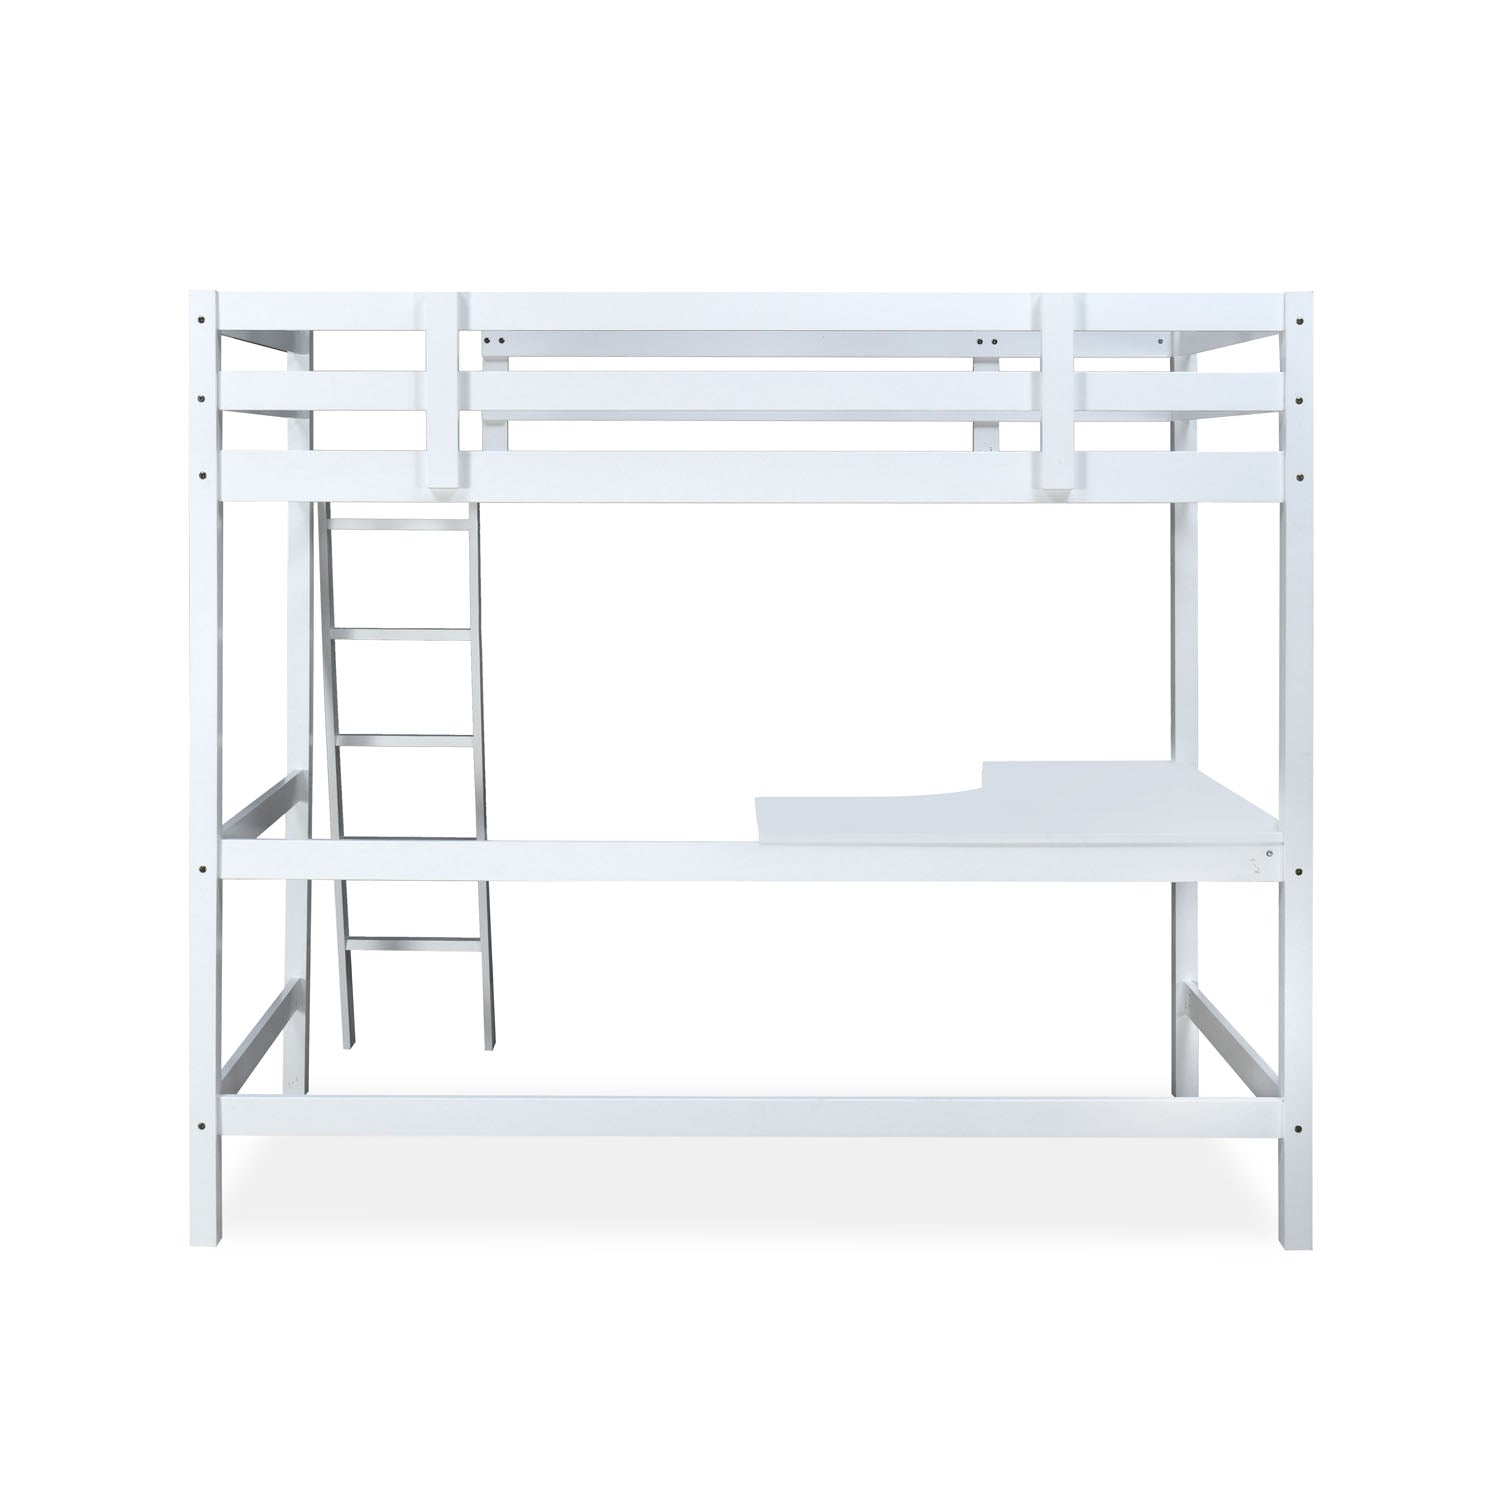 Genius Solid Wood Bunk Bed With Study Table (White)